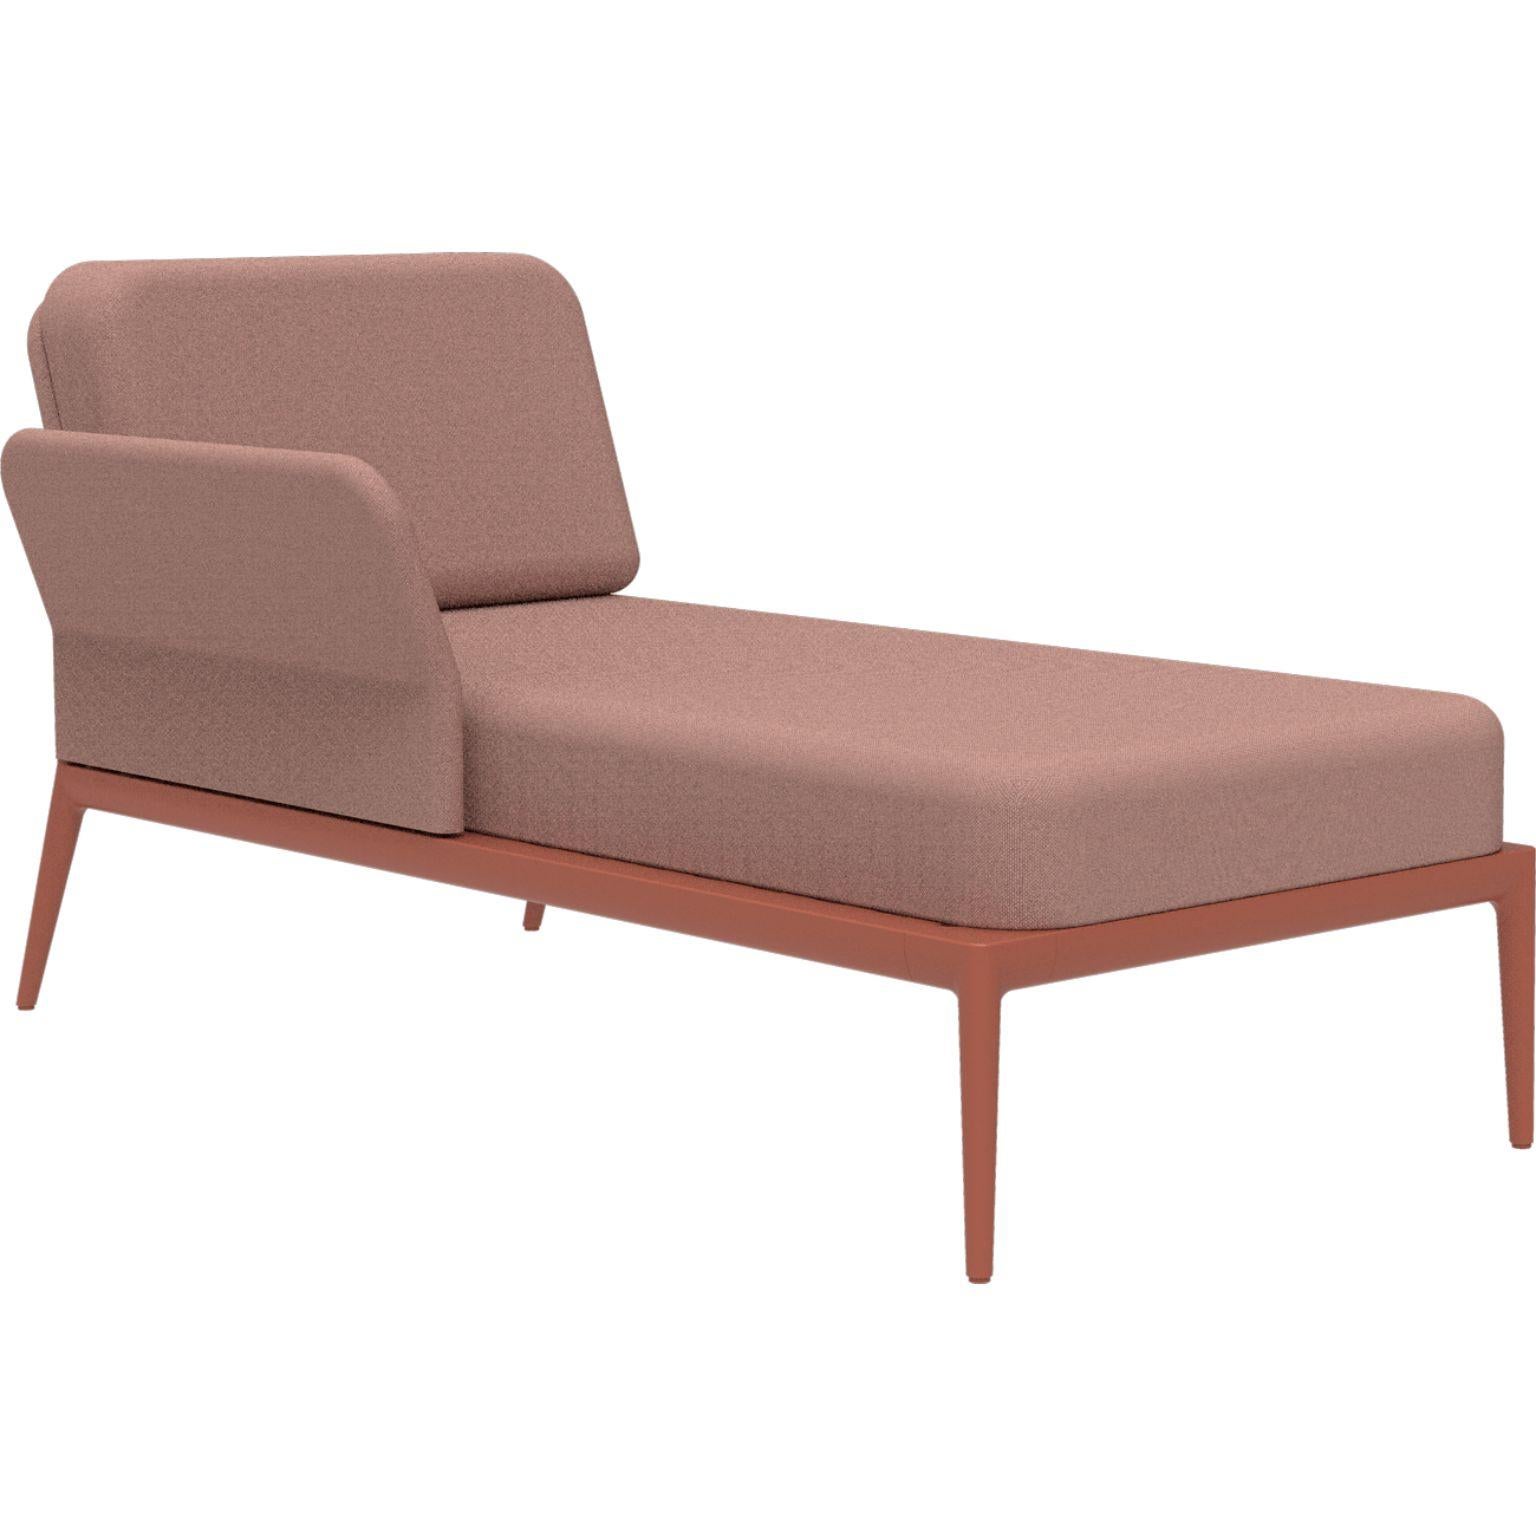 Cover Salmon Right Chaise Longue by MOWEE
Dimensions: D 80 x W 155 x H 81 cm (seat height 42 cm).
Material: Aluminum and upholstery.
Weight: 28 kg.
Also available in different colors and finishes. Please contact us.

An unmistakable collection